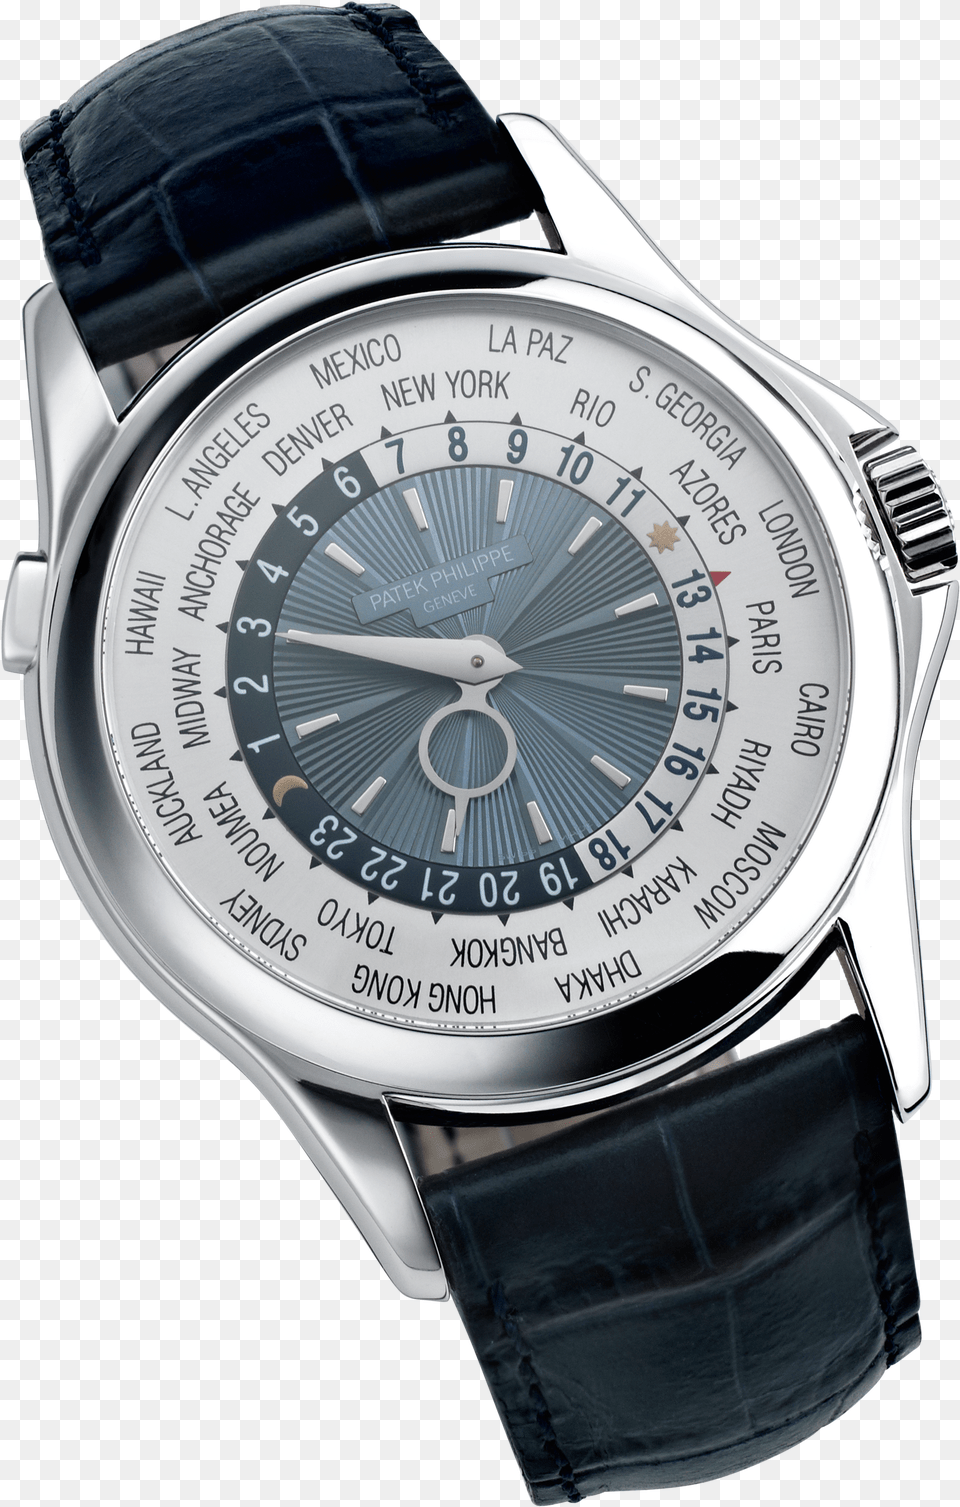 Patek Philippe Gentlemens World Time 5130p Watch In Patek Philippe Watch Transparent Background Free Png